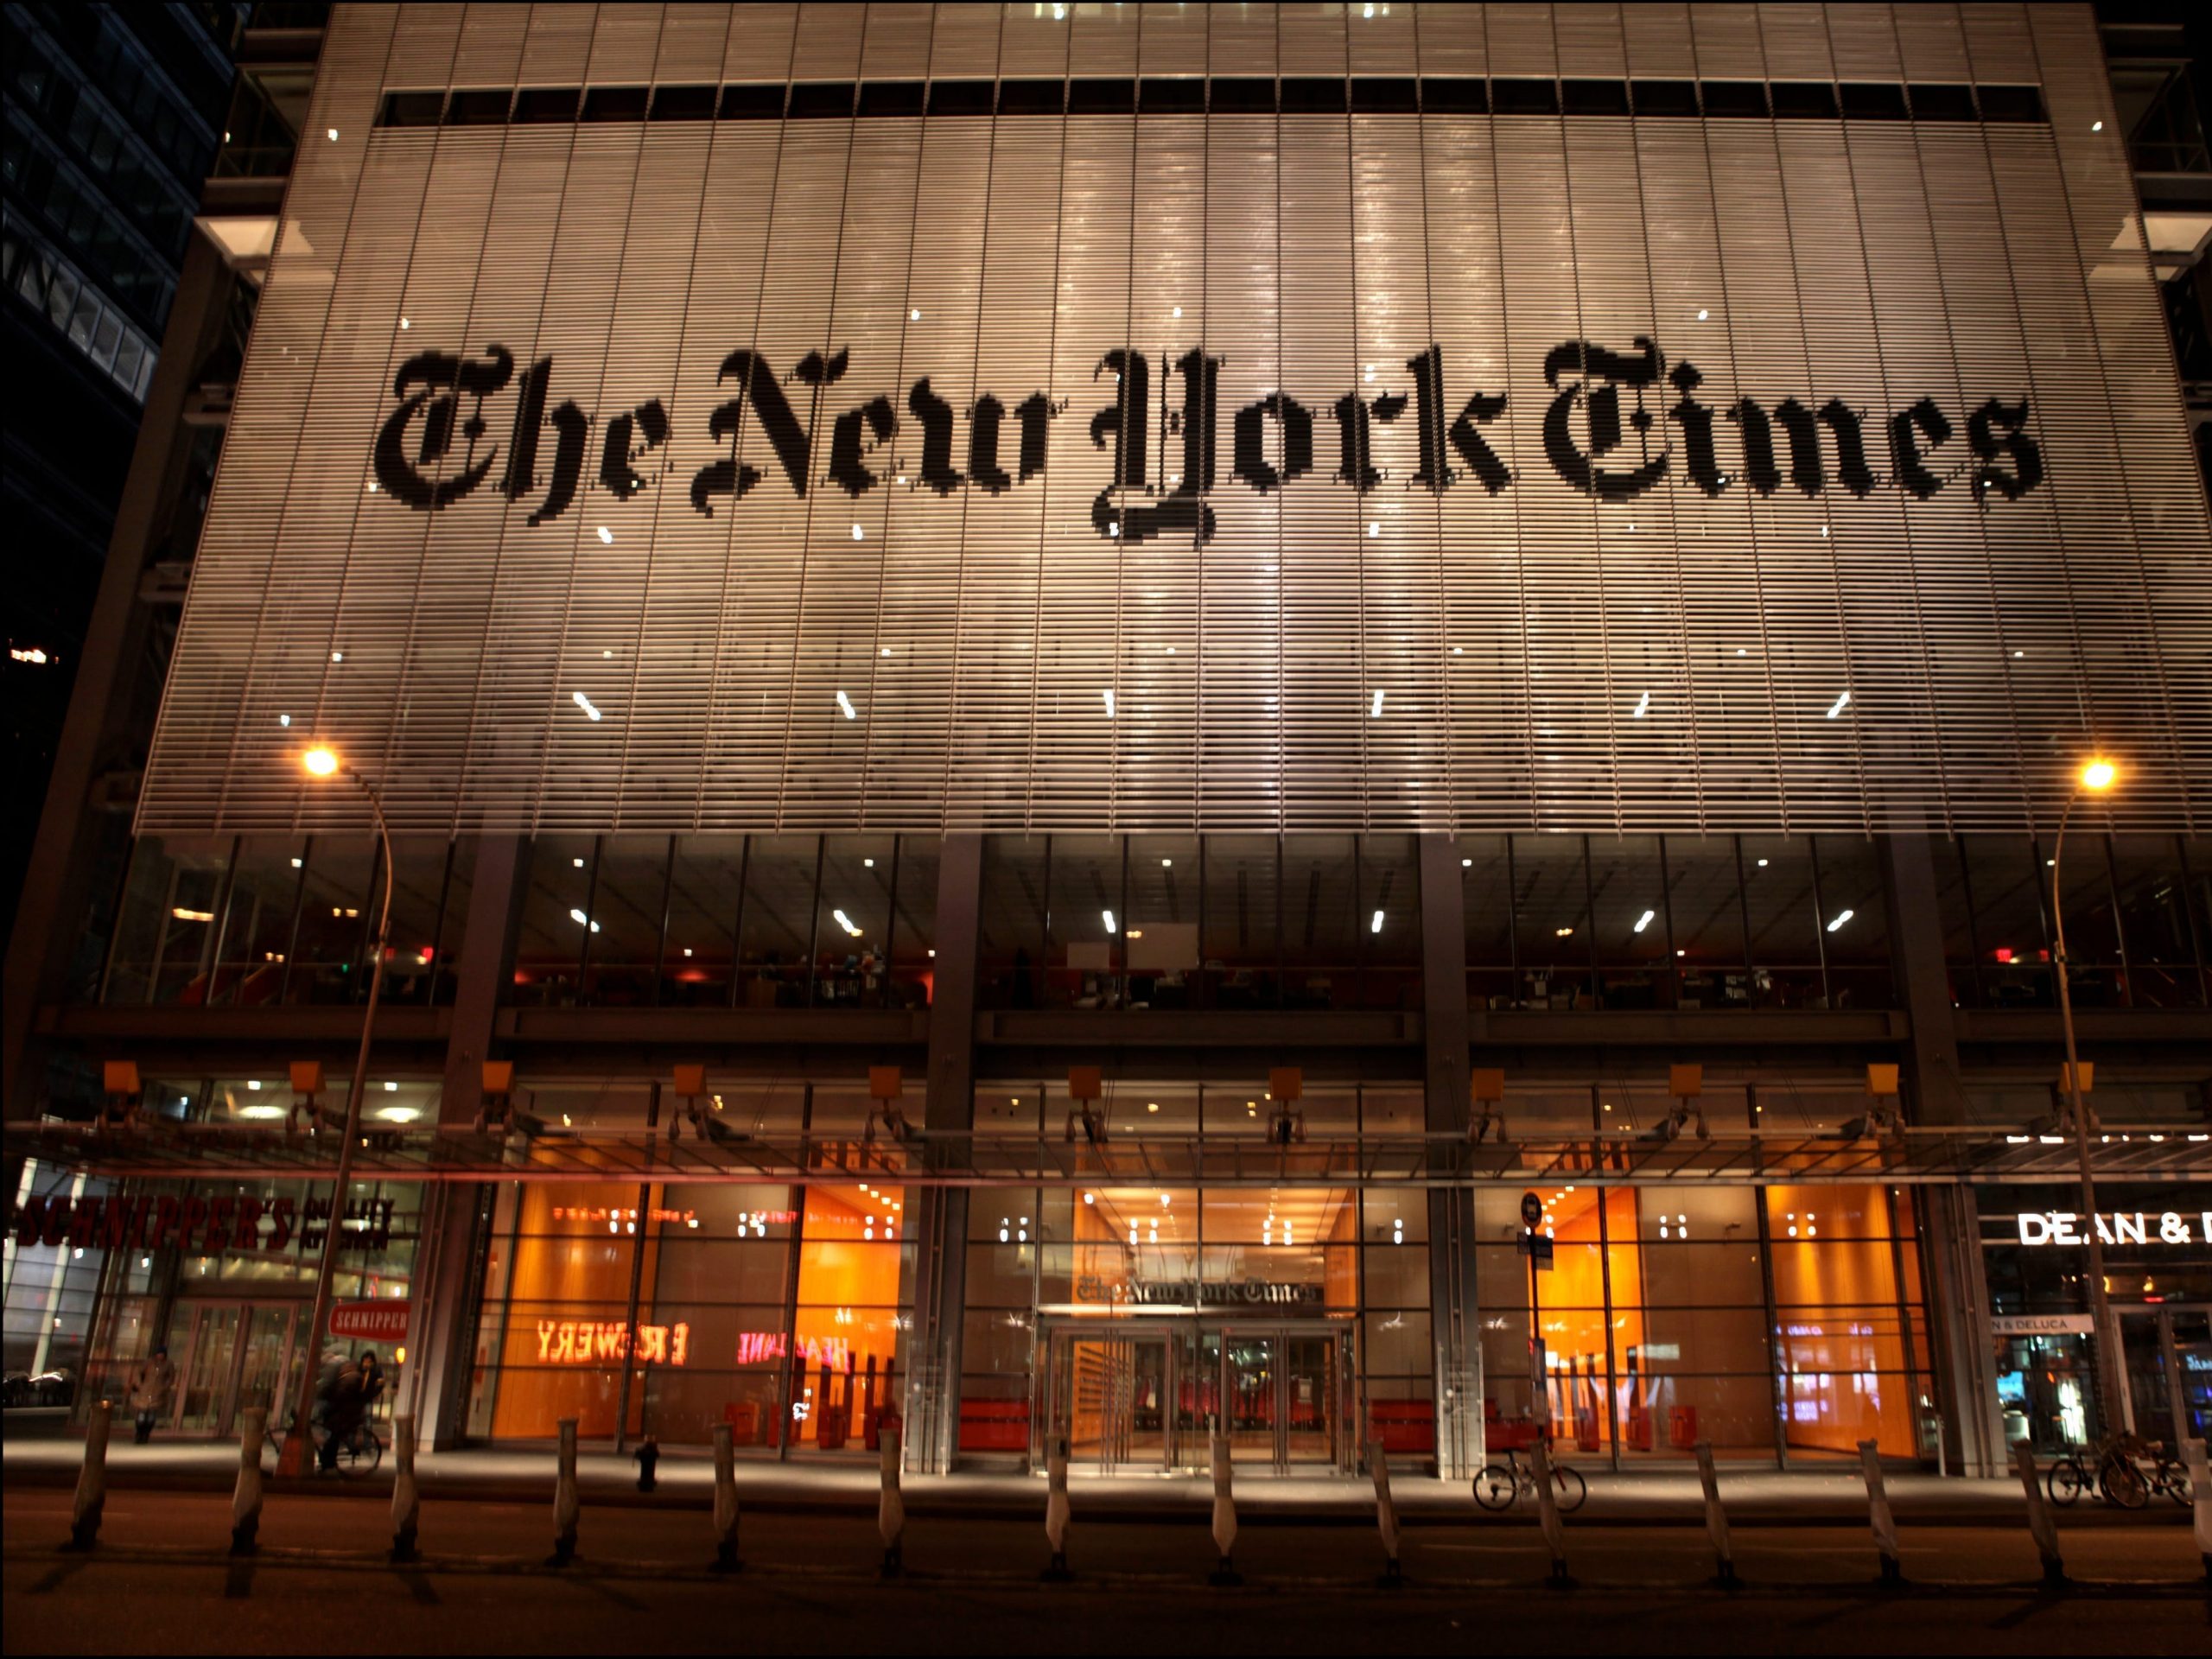 Nighttime view of the New York Times Building